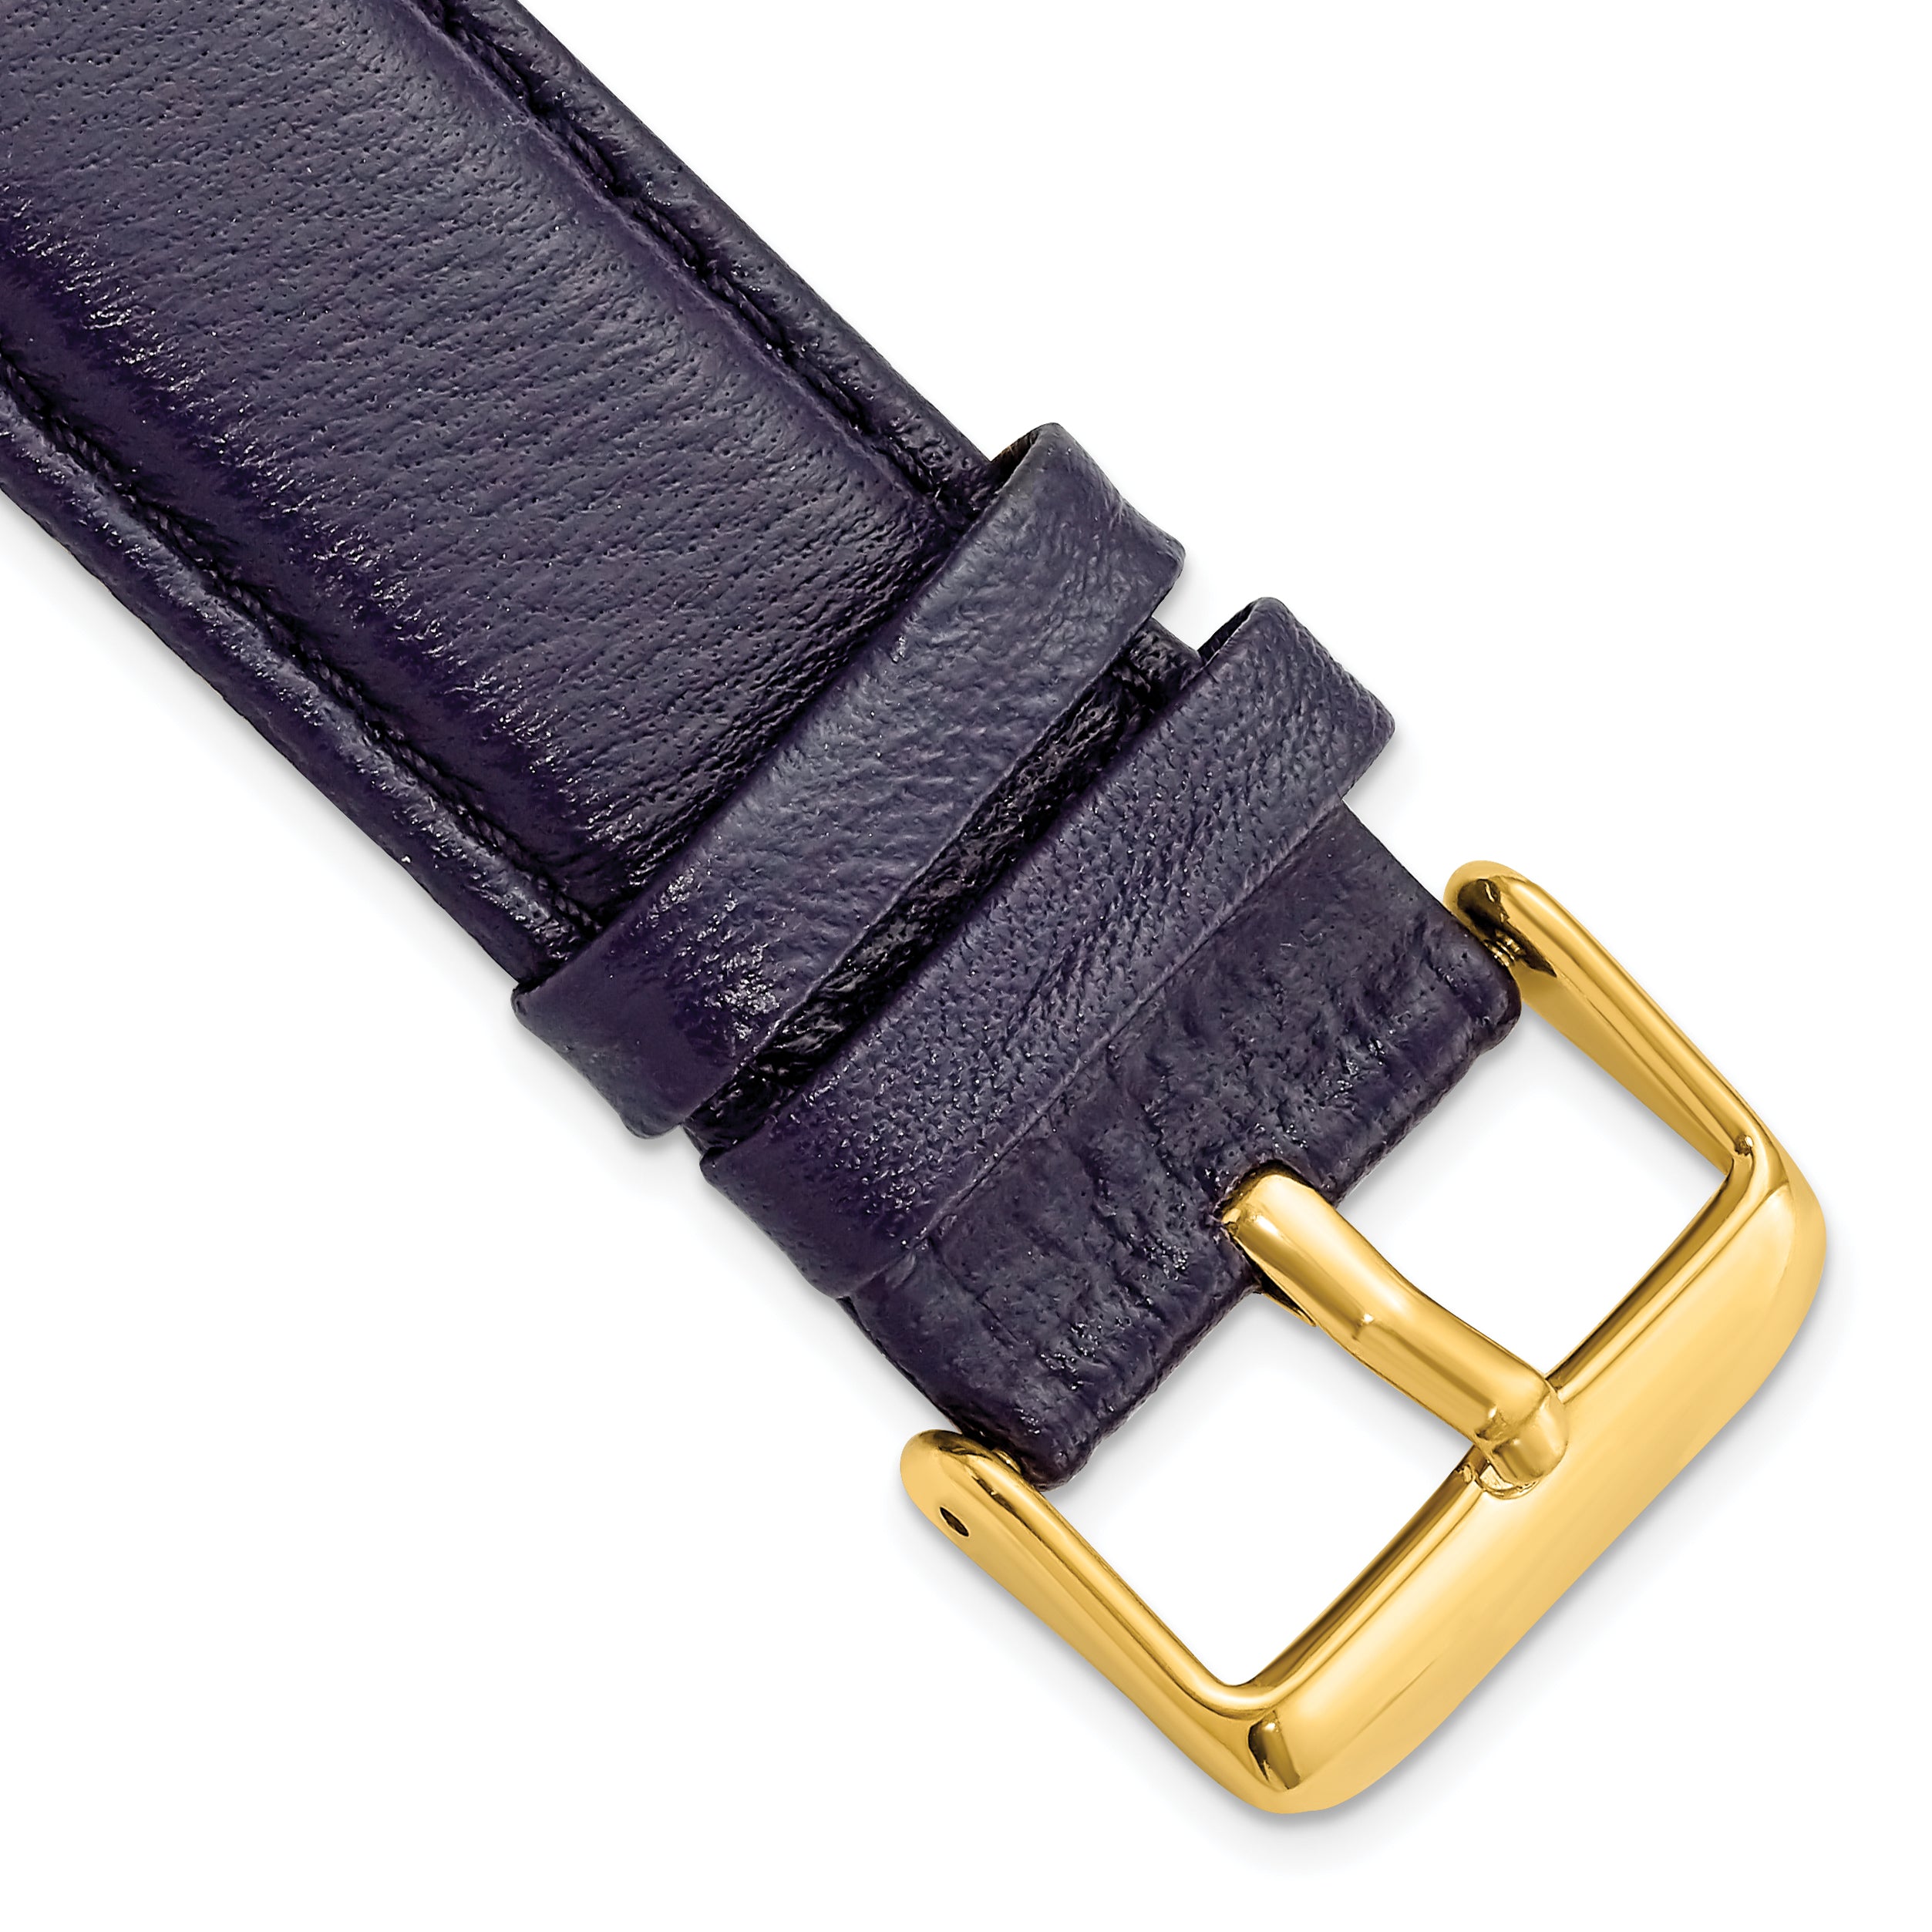 DeBeer 24mm Navy Glove Leather with Gold-tone Panerai Style Buckle 7.75 inch Watch Band